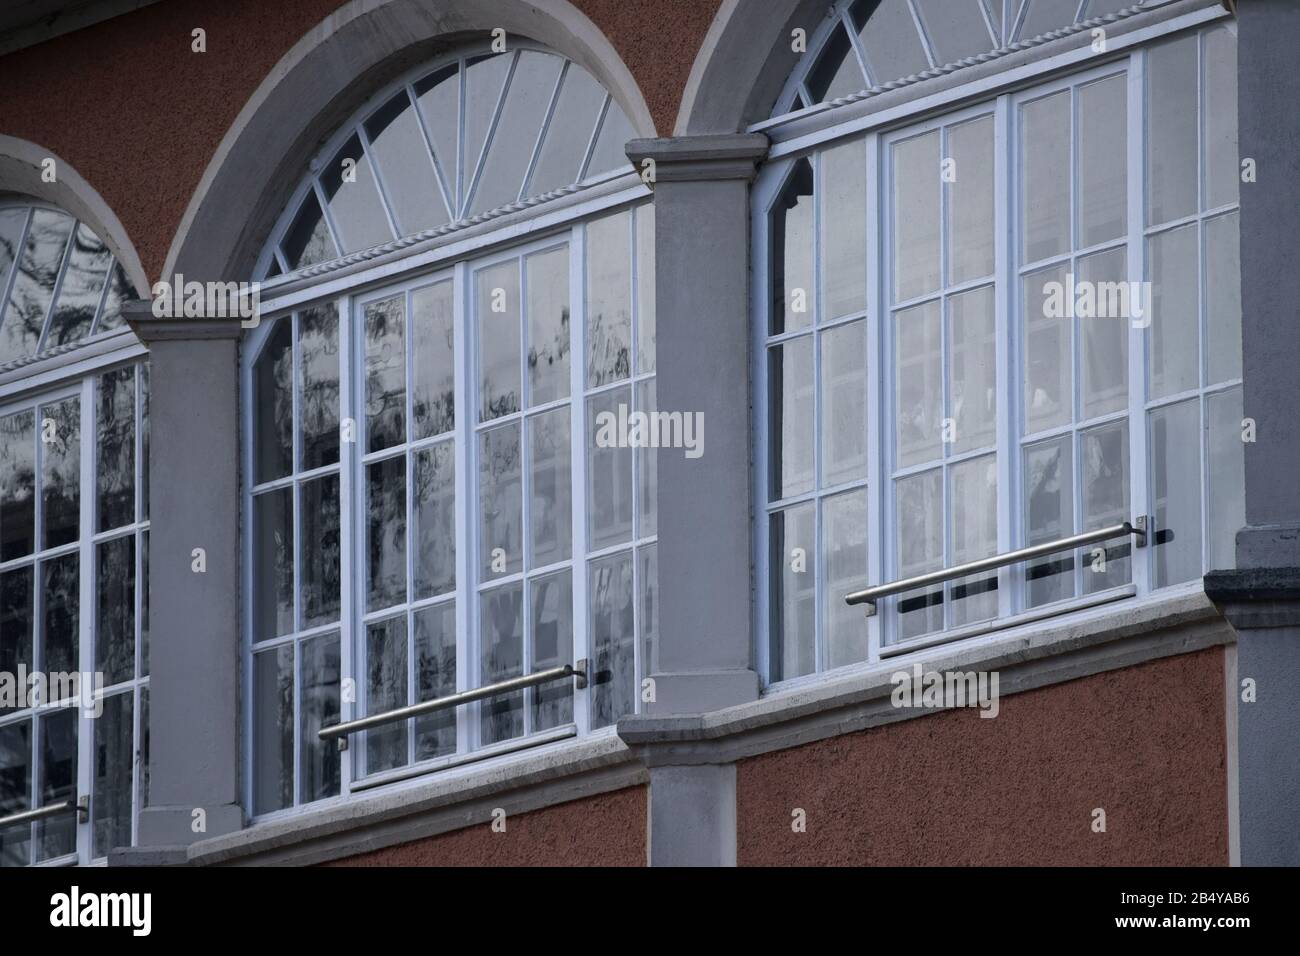 Rung window with Stainless steel security Stock Photo